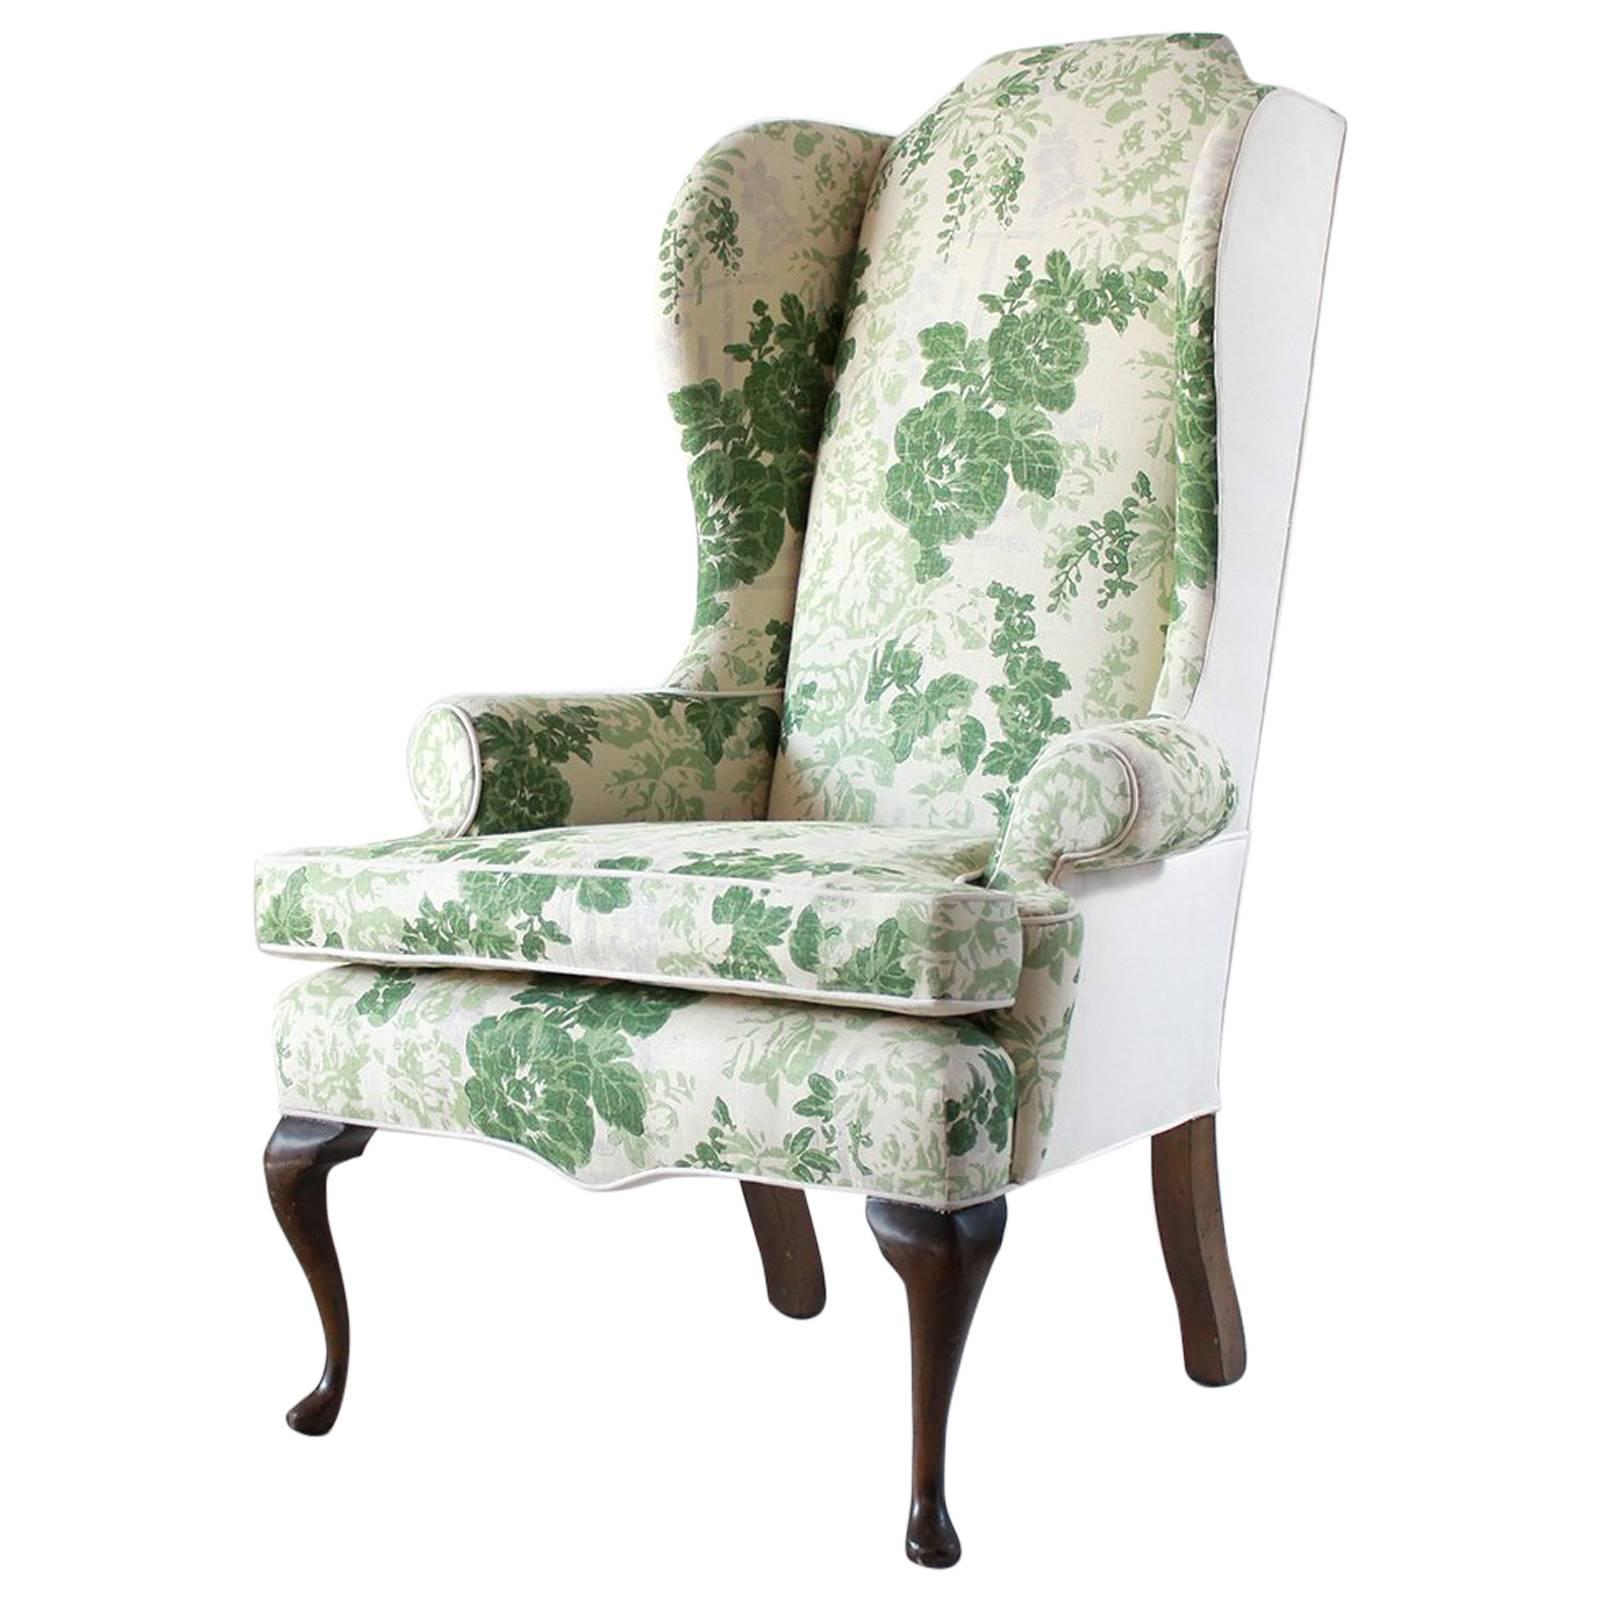 Vintage Wing Chair Upholstered in Green Floral Fabric